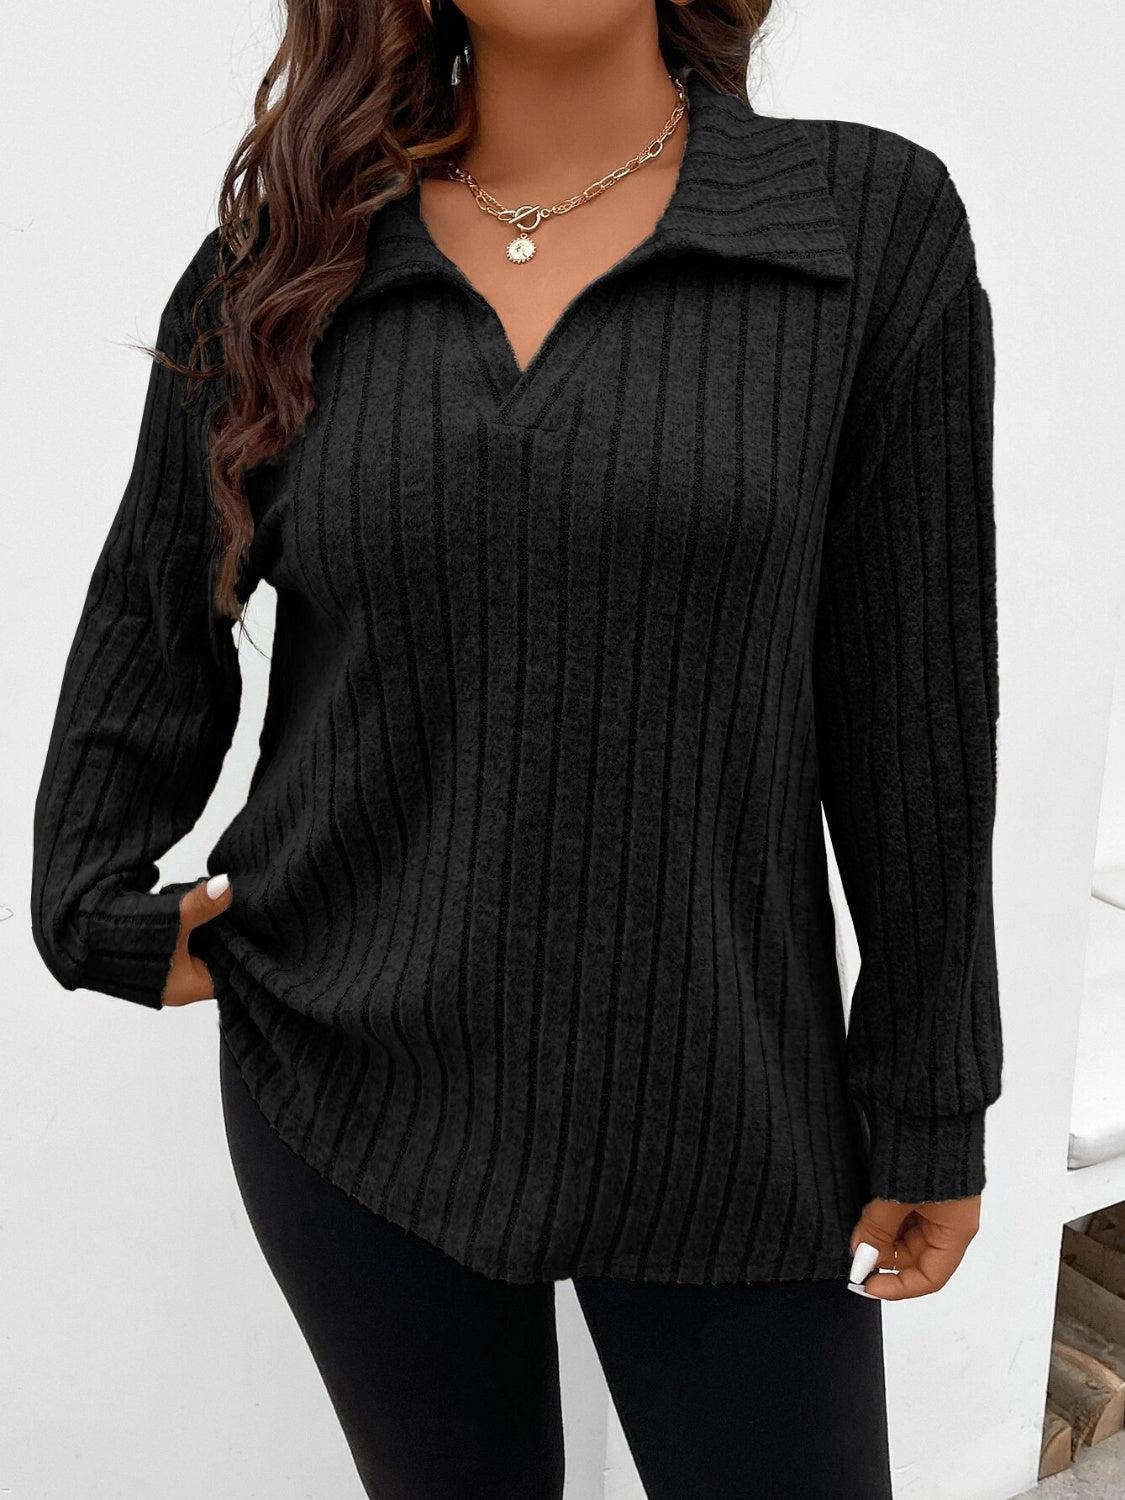 a woman wearing a black sweater and leggings